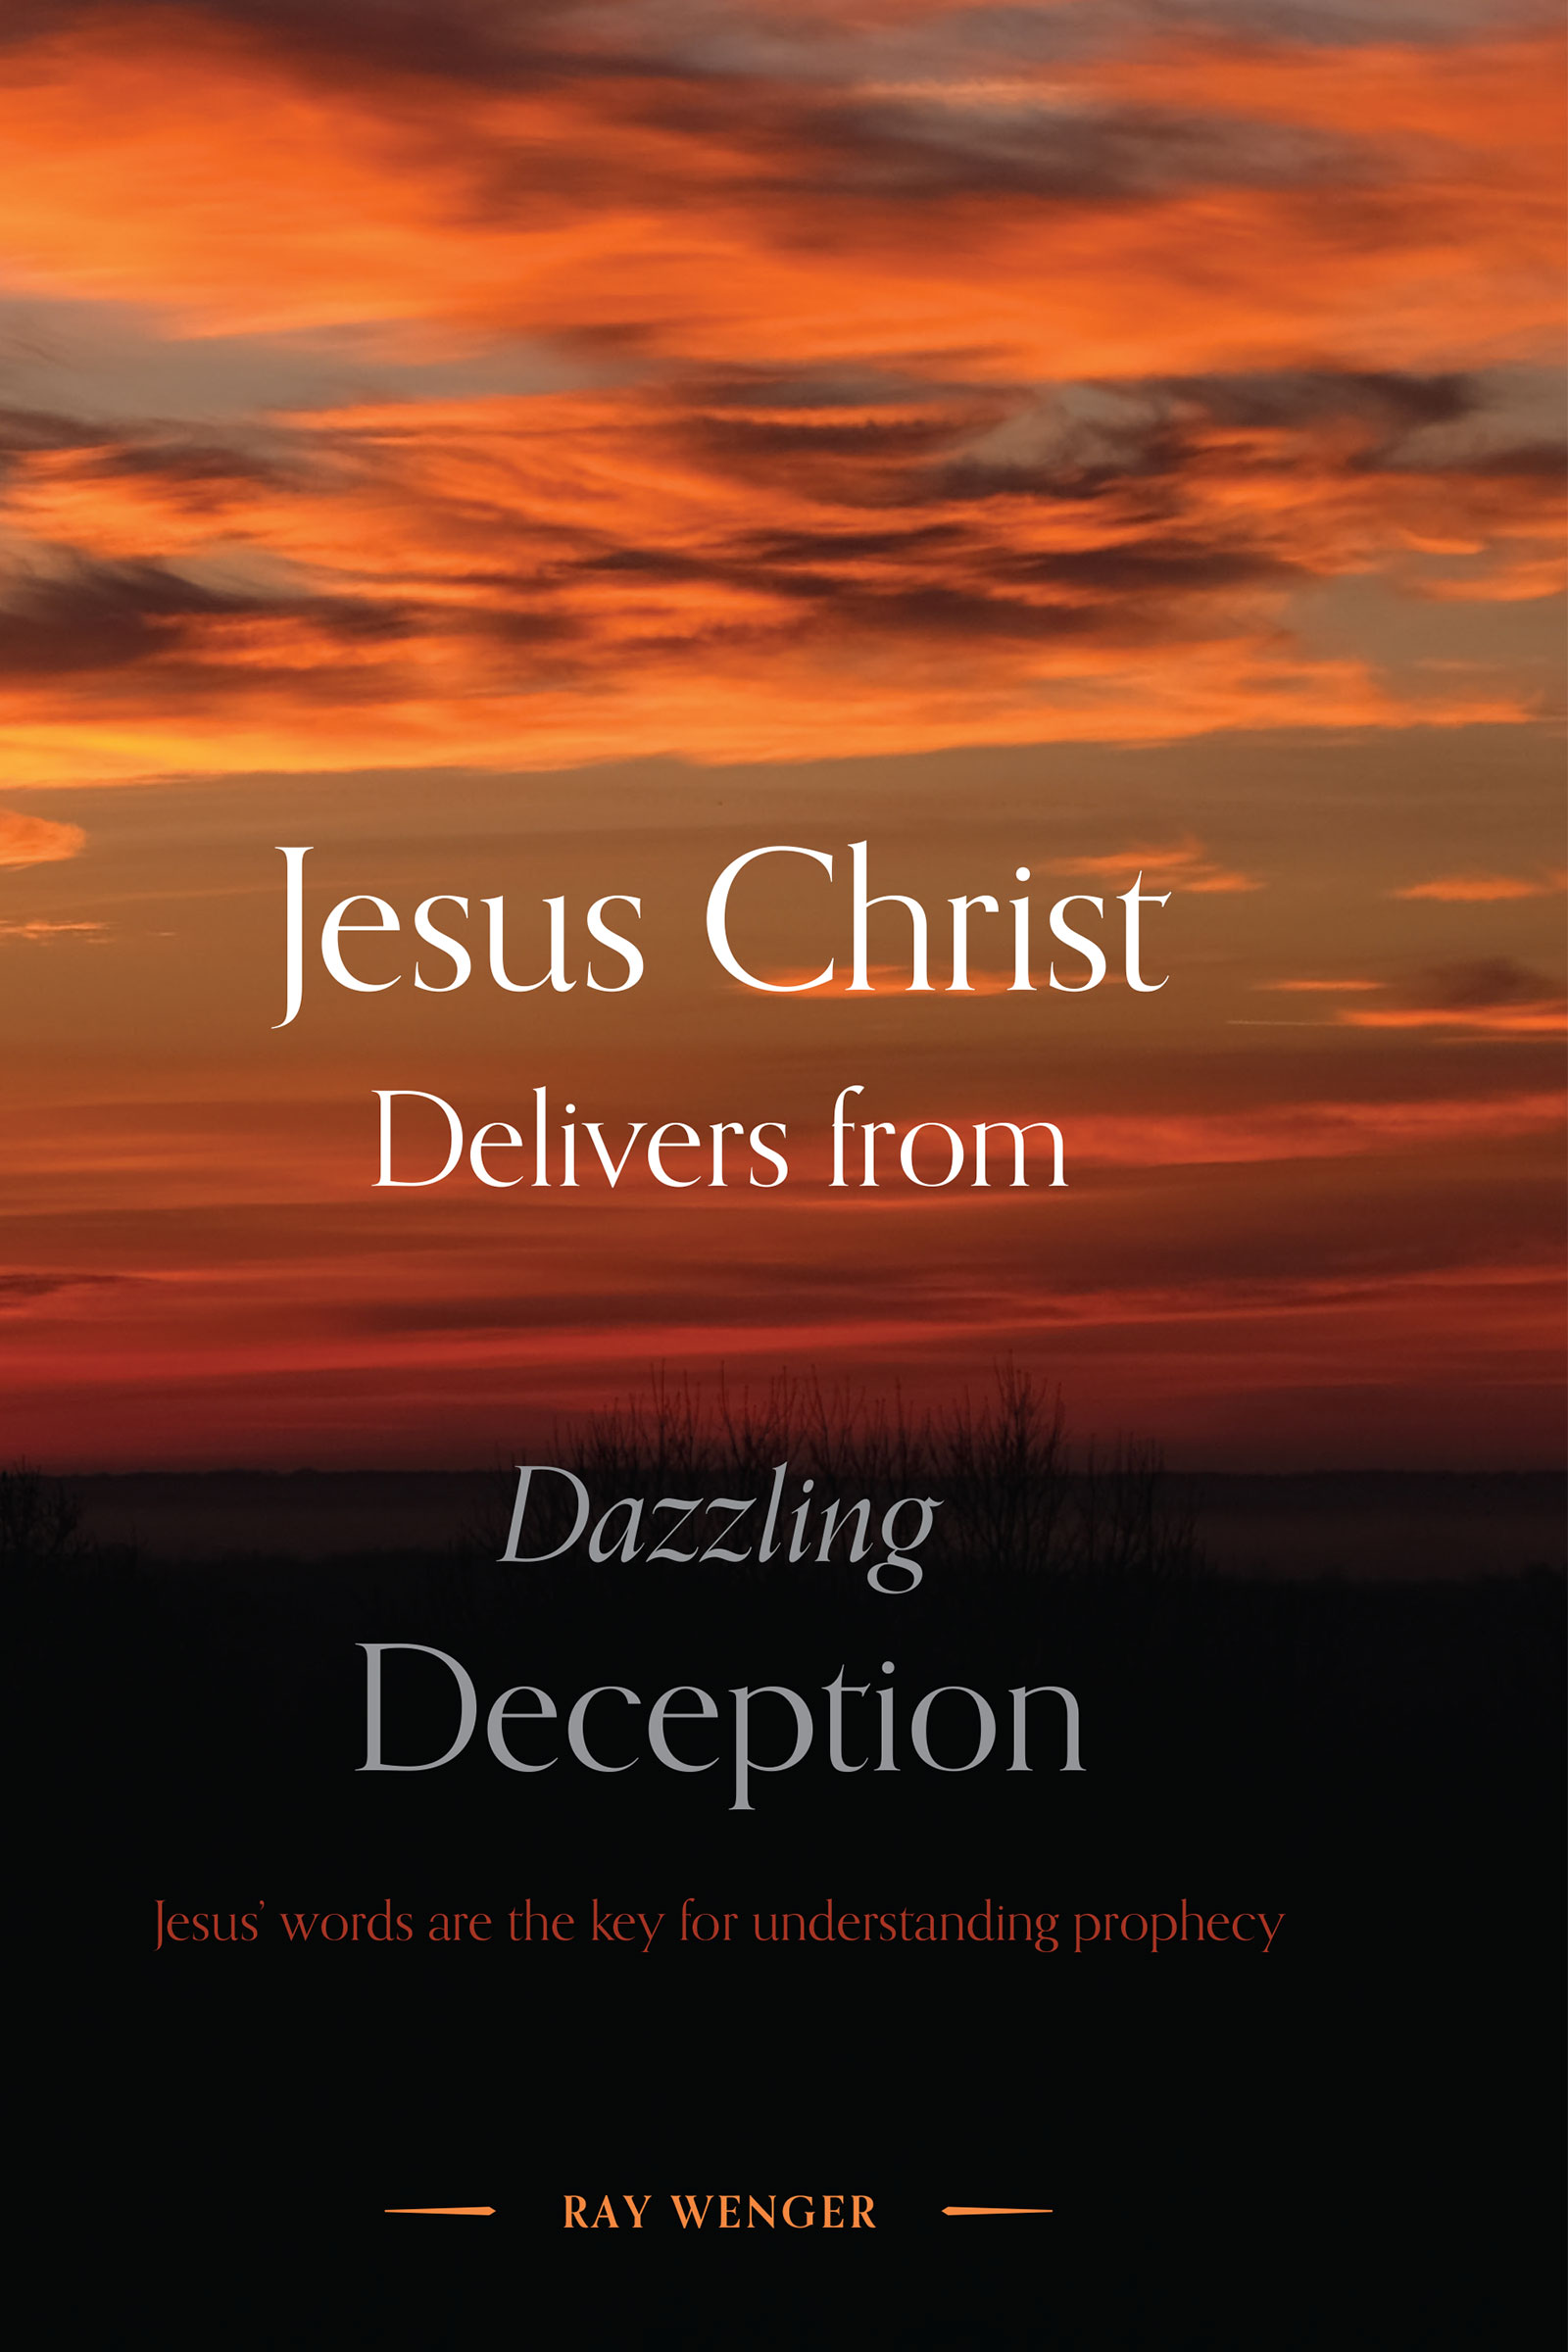 Jesus Christ Delivers from Dazzling Deception by Ray Wenger